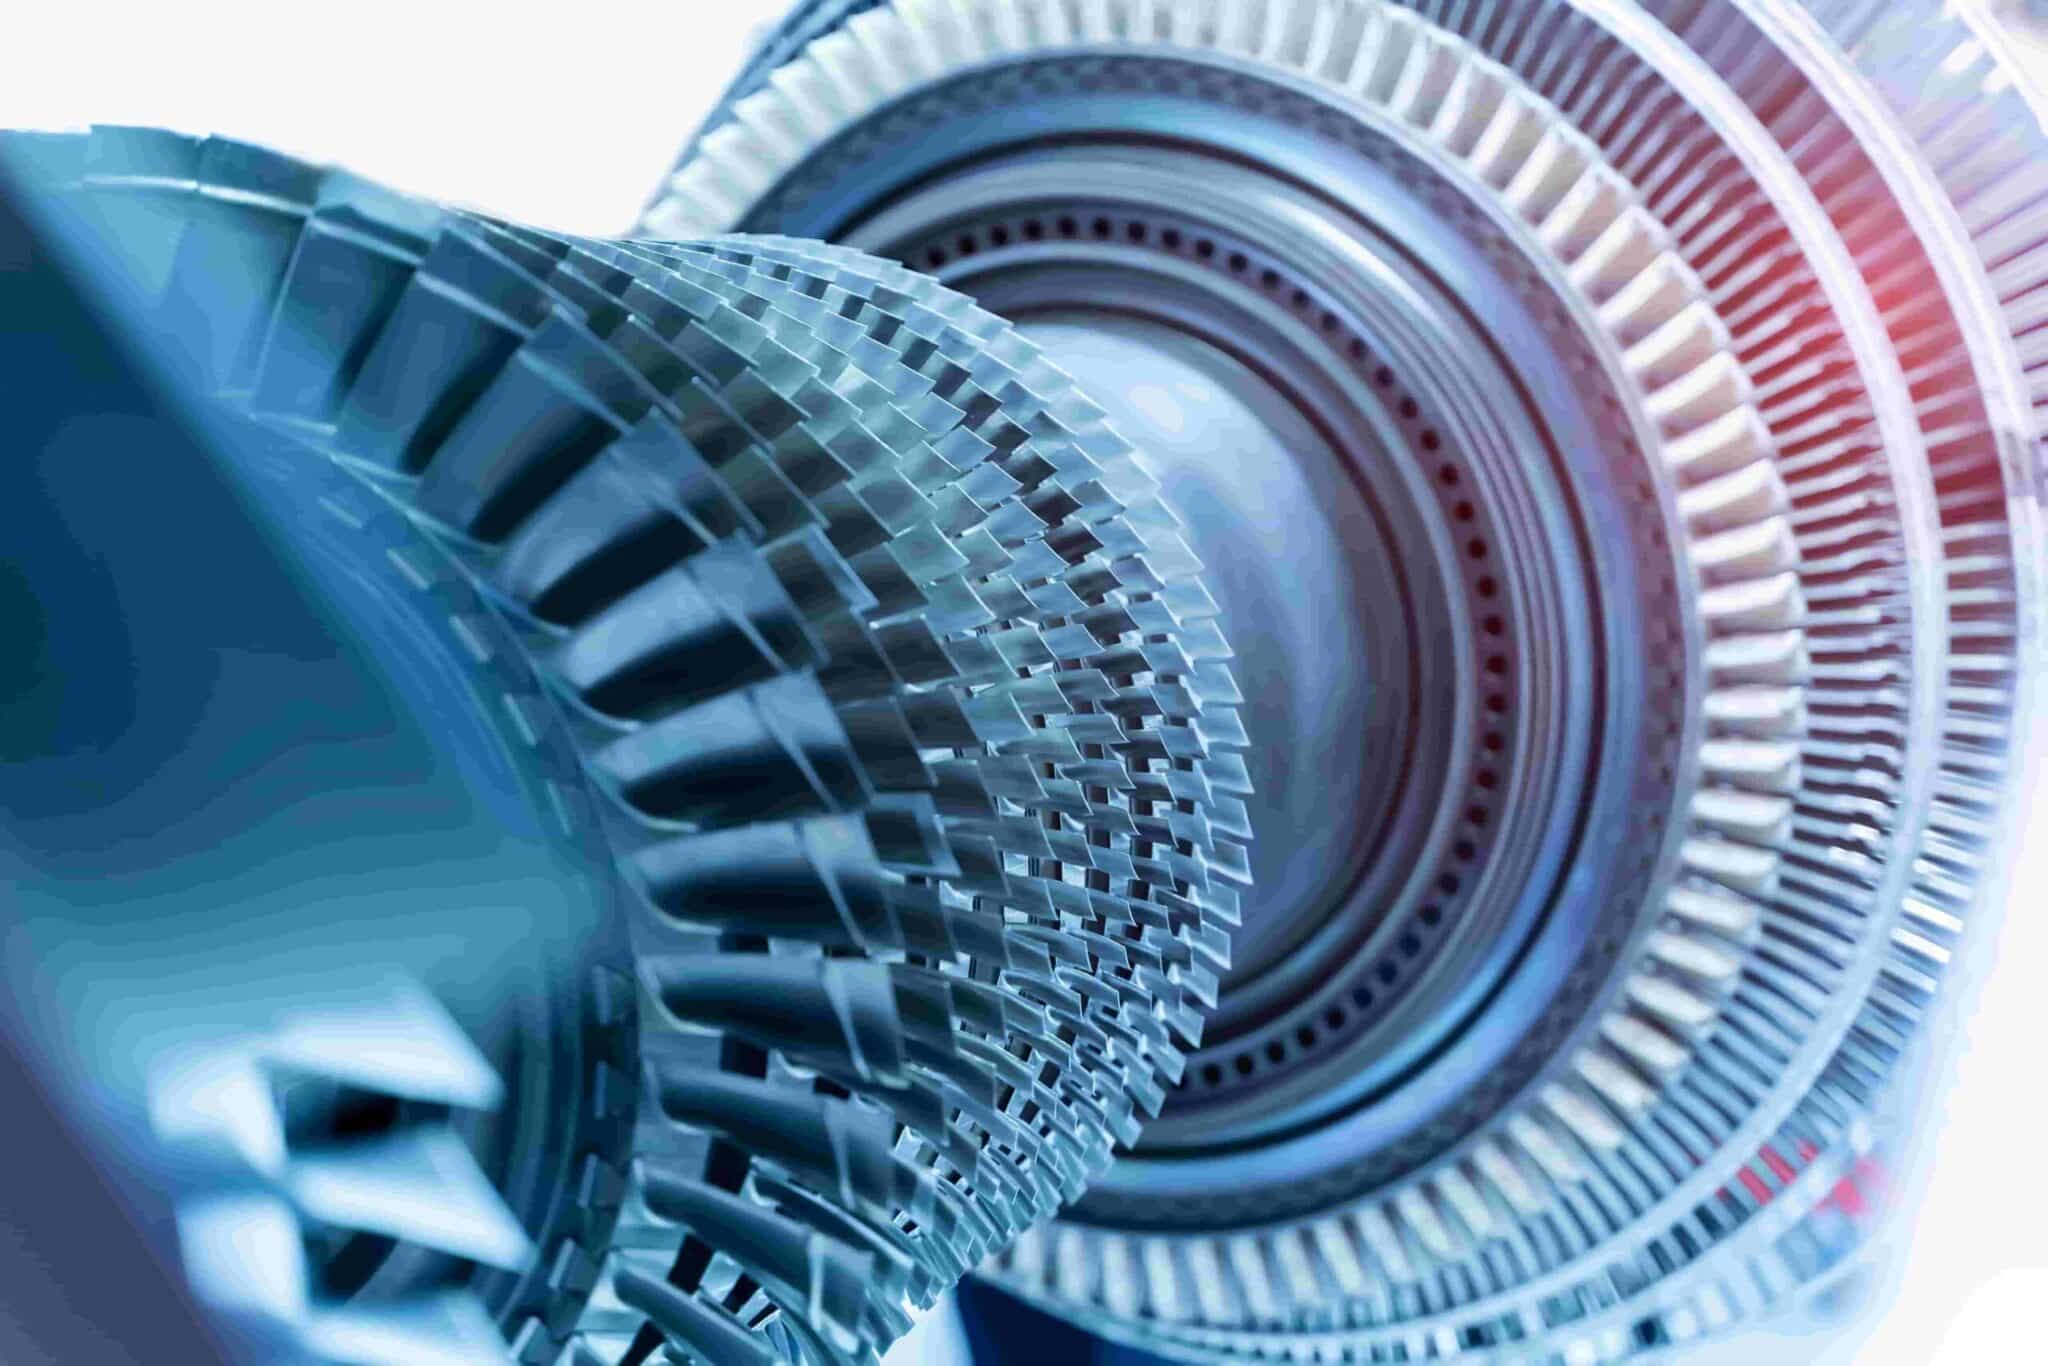 A close up image of jet engine components.